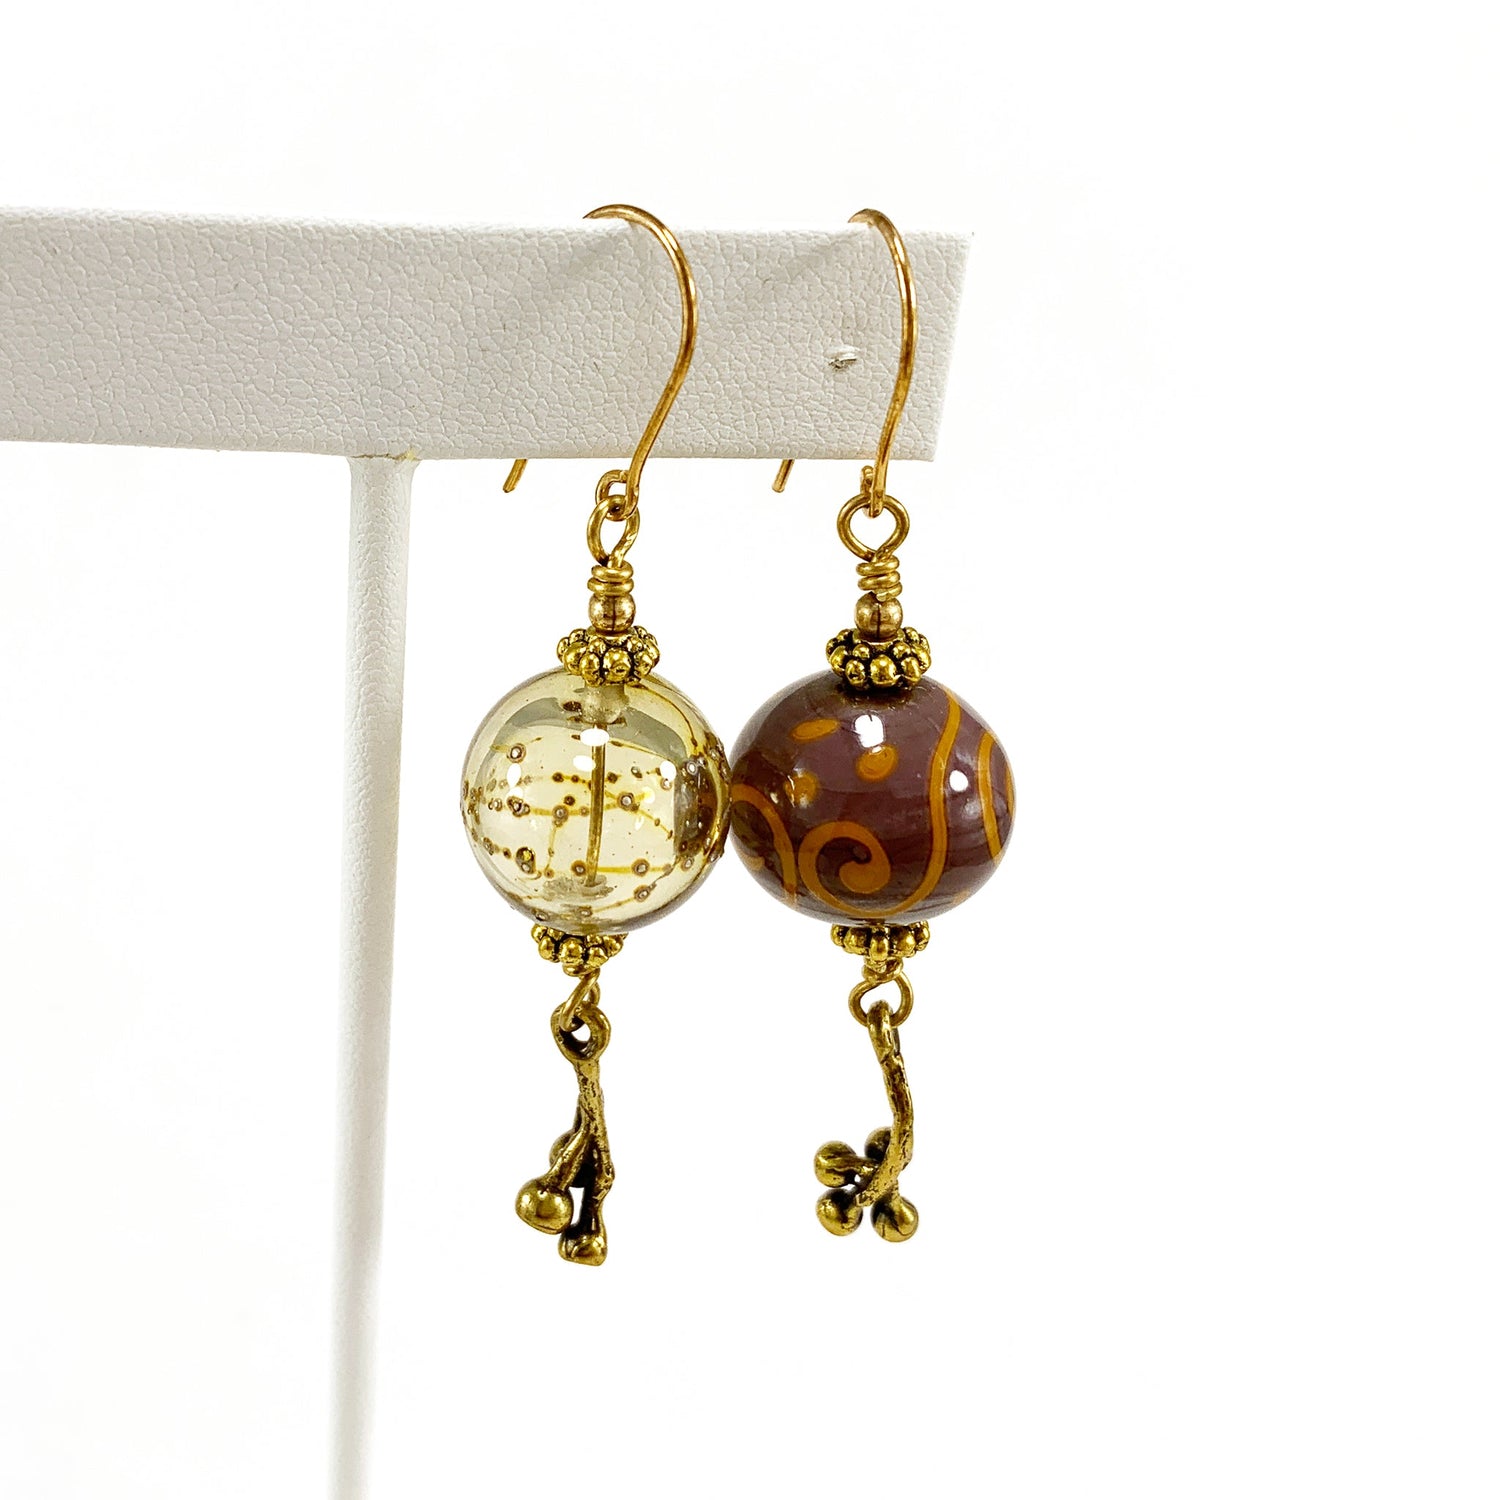 Amber and Lavender Earrings - The Glass Acorn